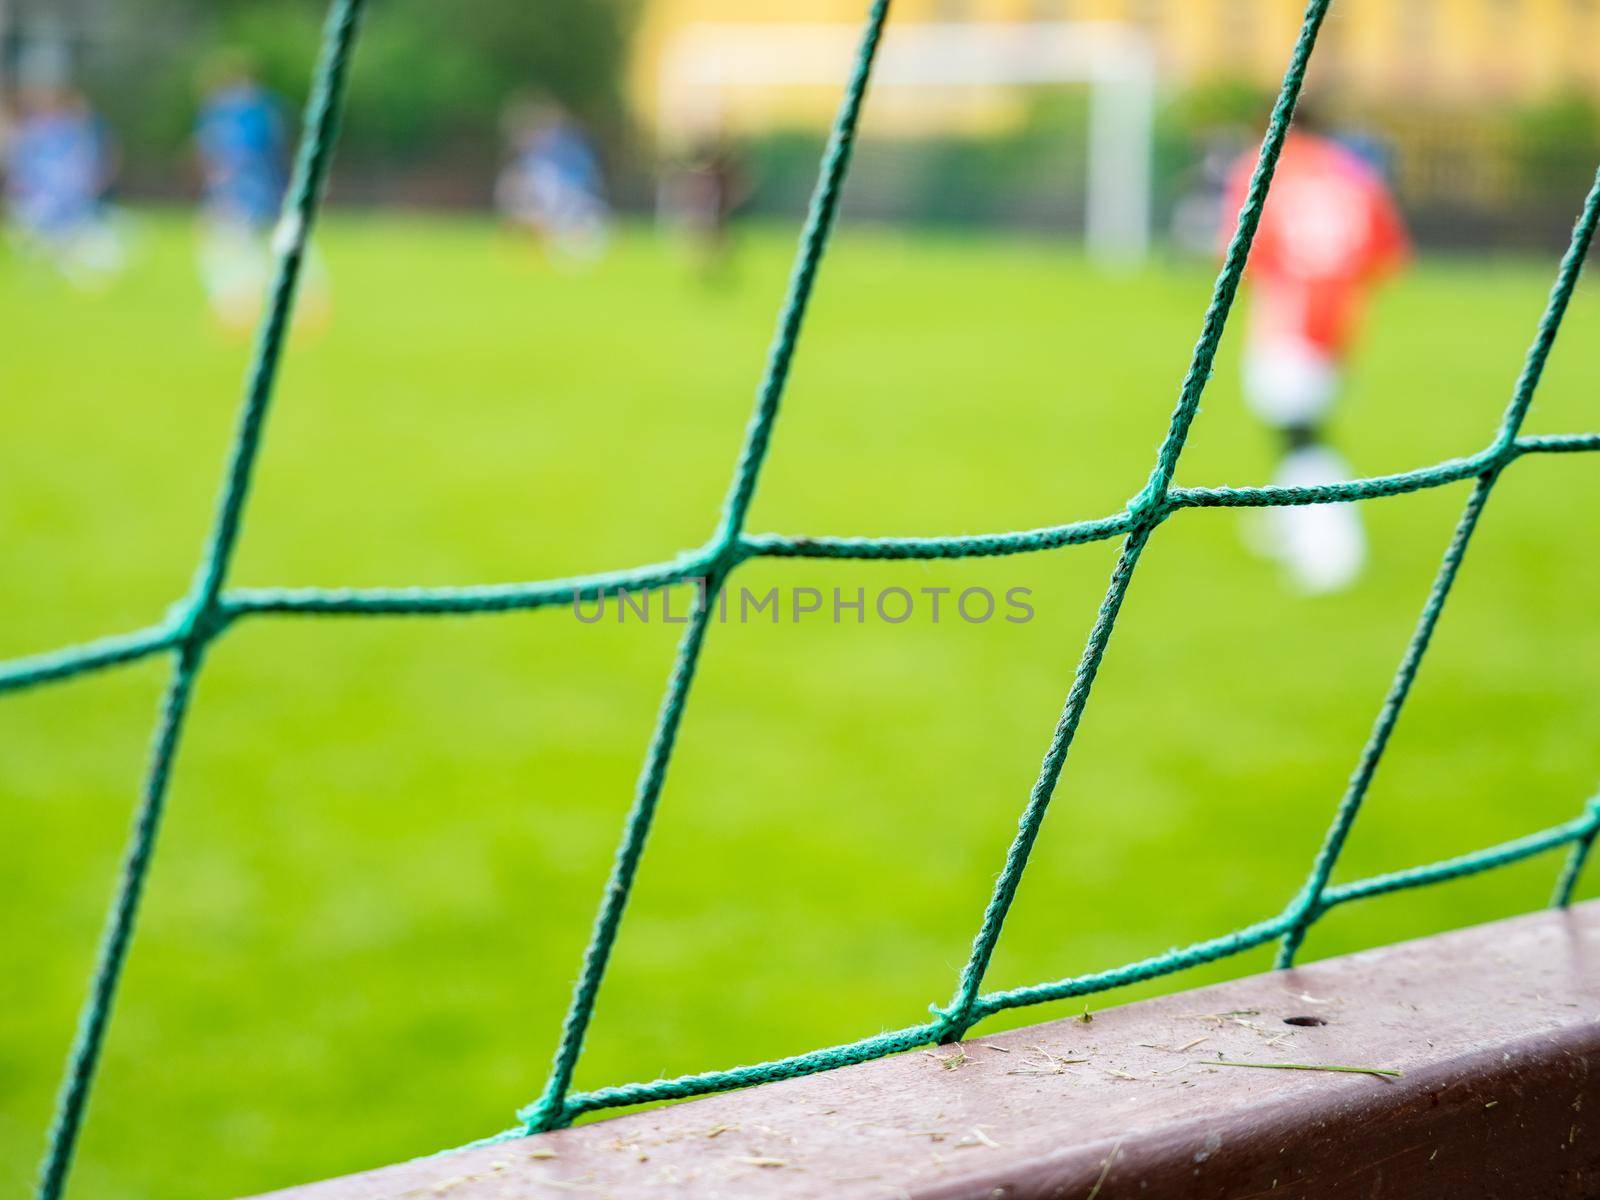 Soccer game behind the barrier or fence, the goal keeper in red wearing